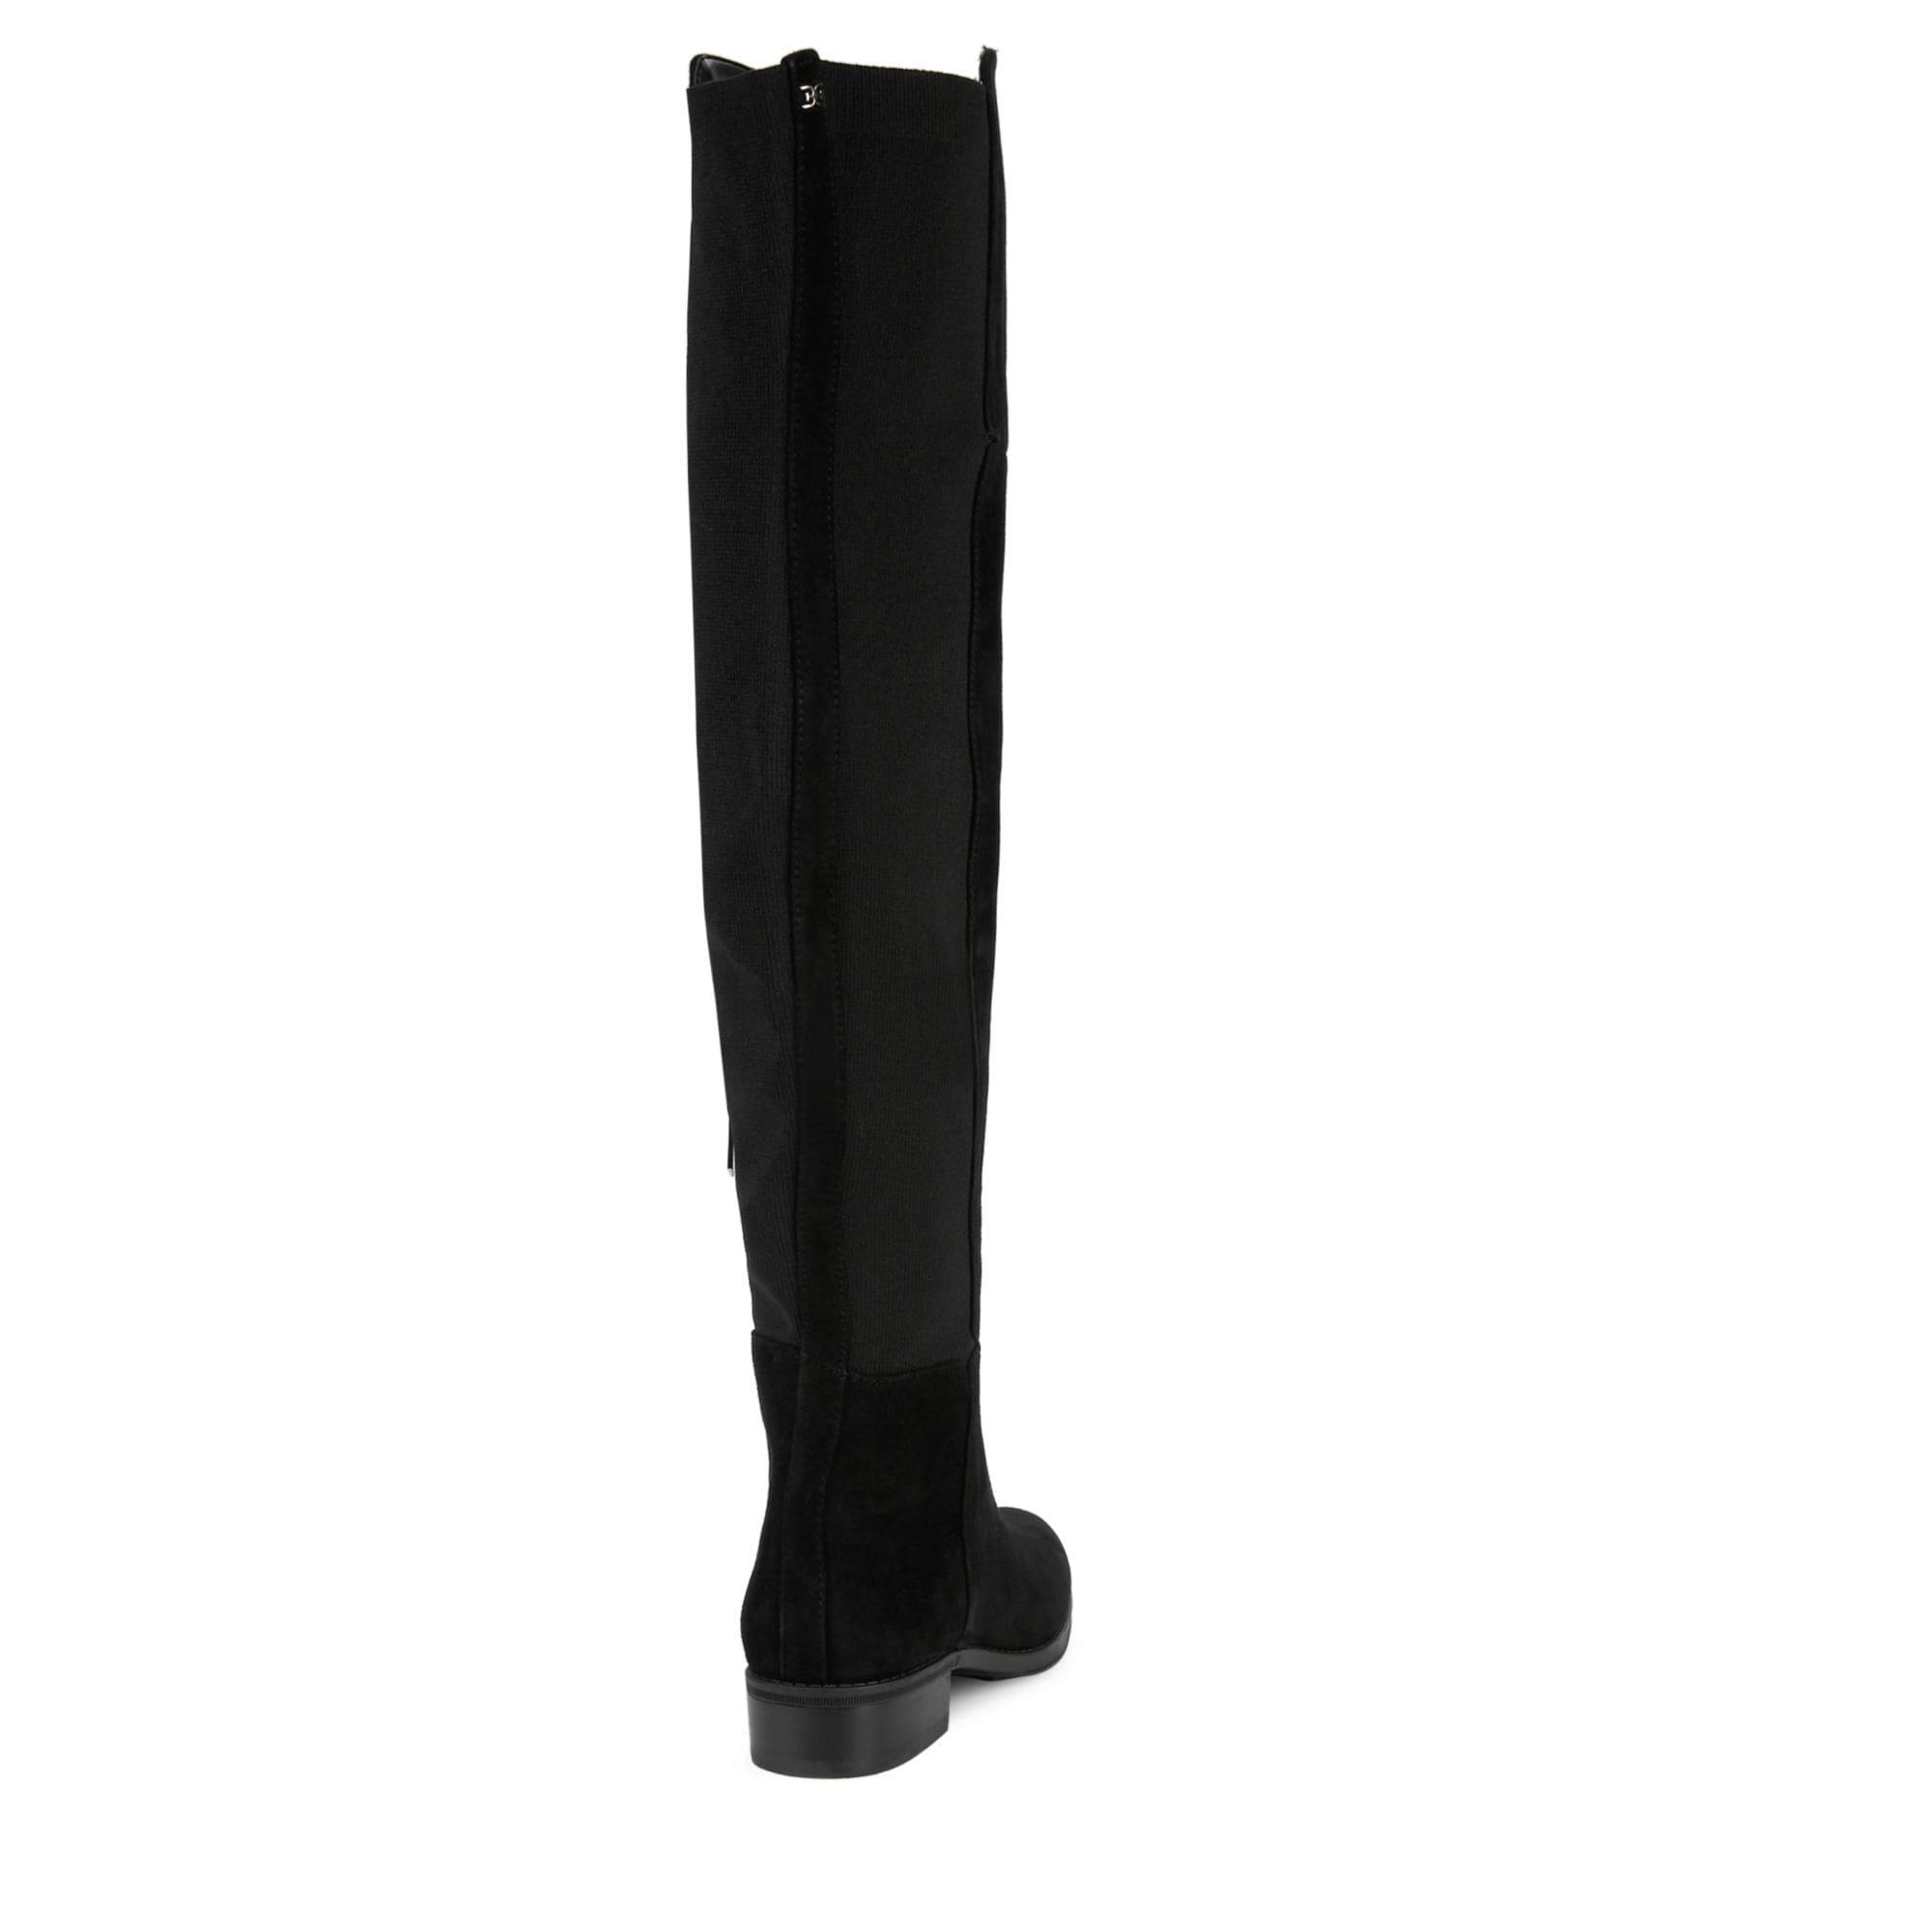 Sam Edelman Suede Pam Over-the-knee Boots in Black Suede (Black) - Lyst